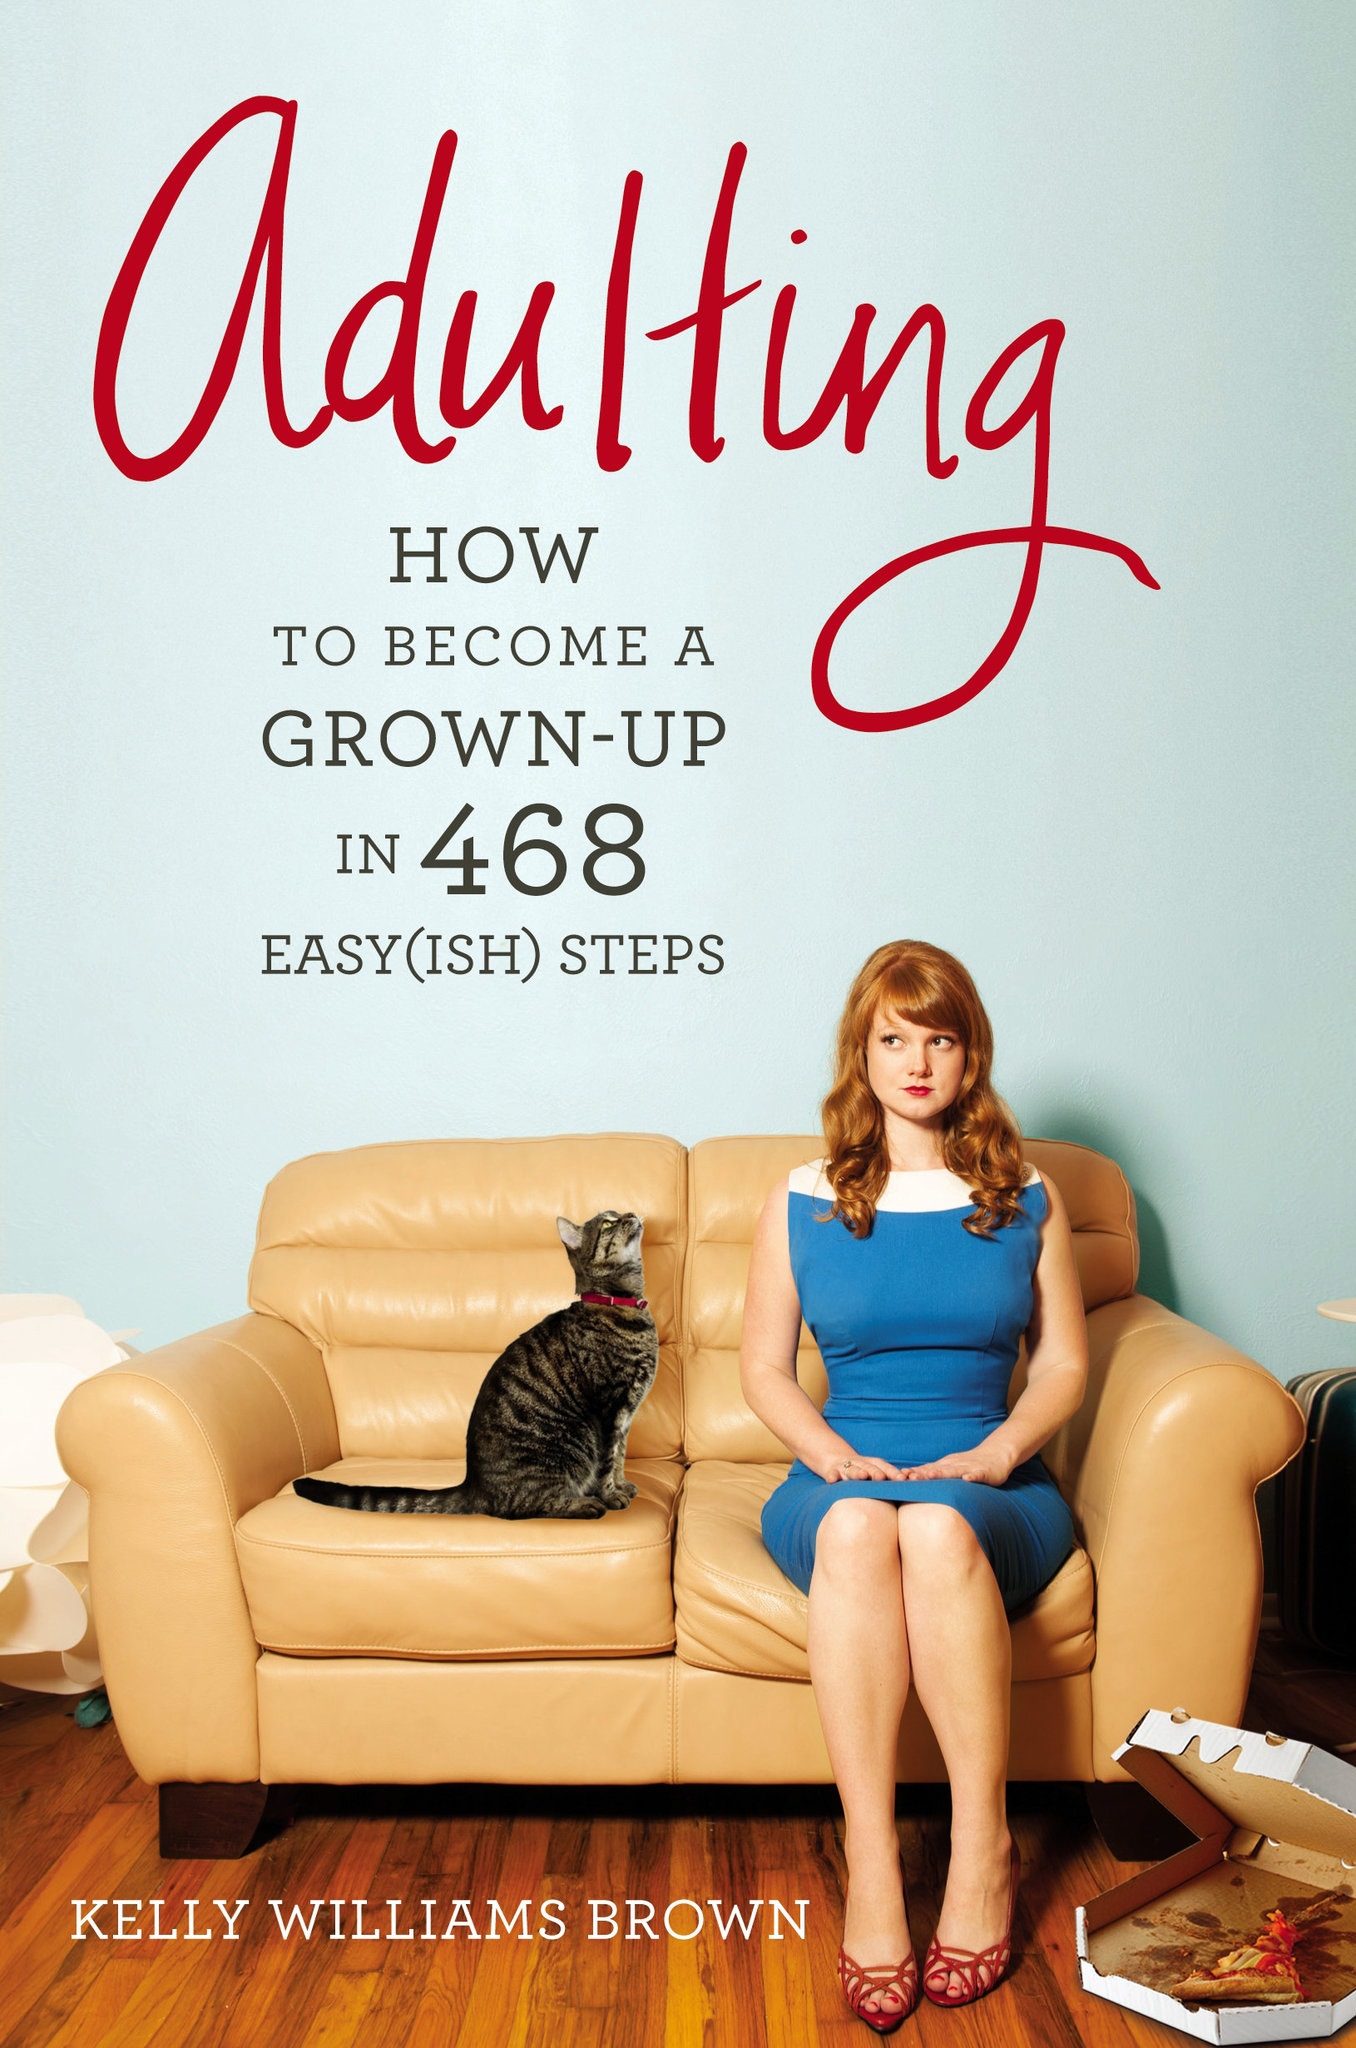 'Adulting: How to Become a Grown-up' by Kelly Williams Brown